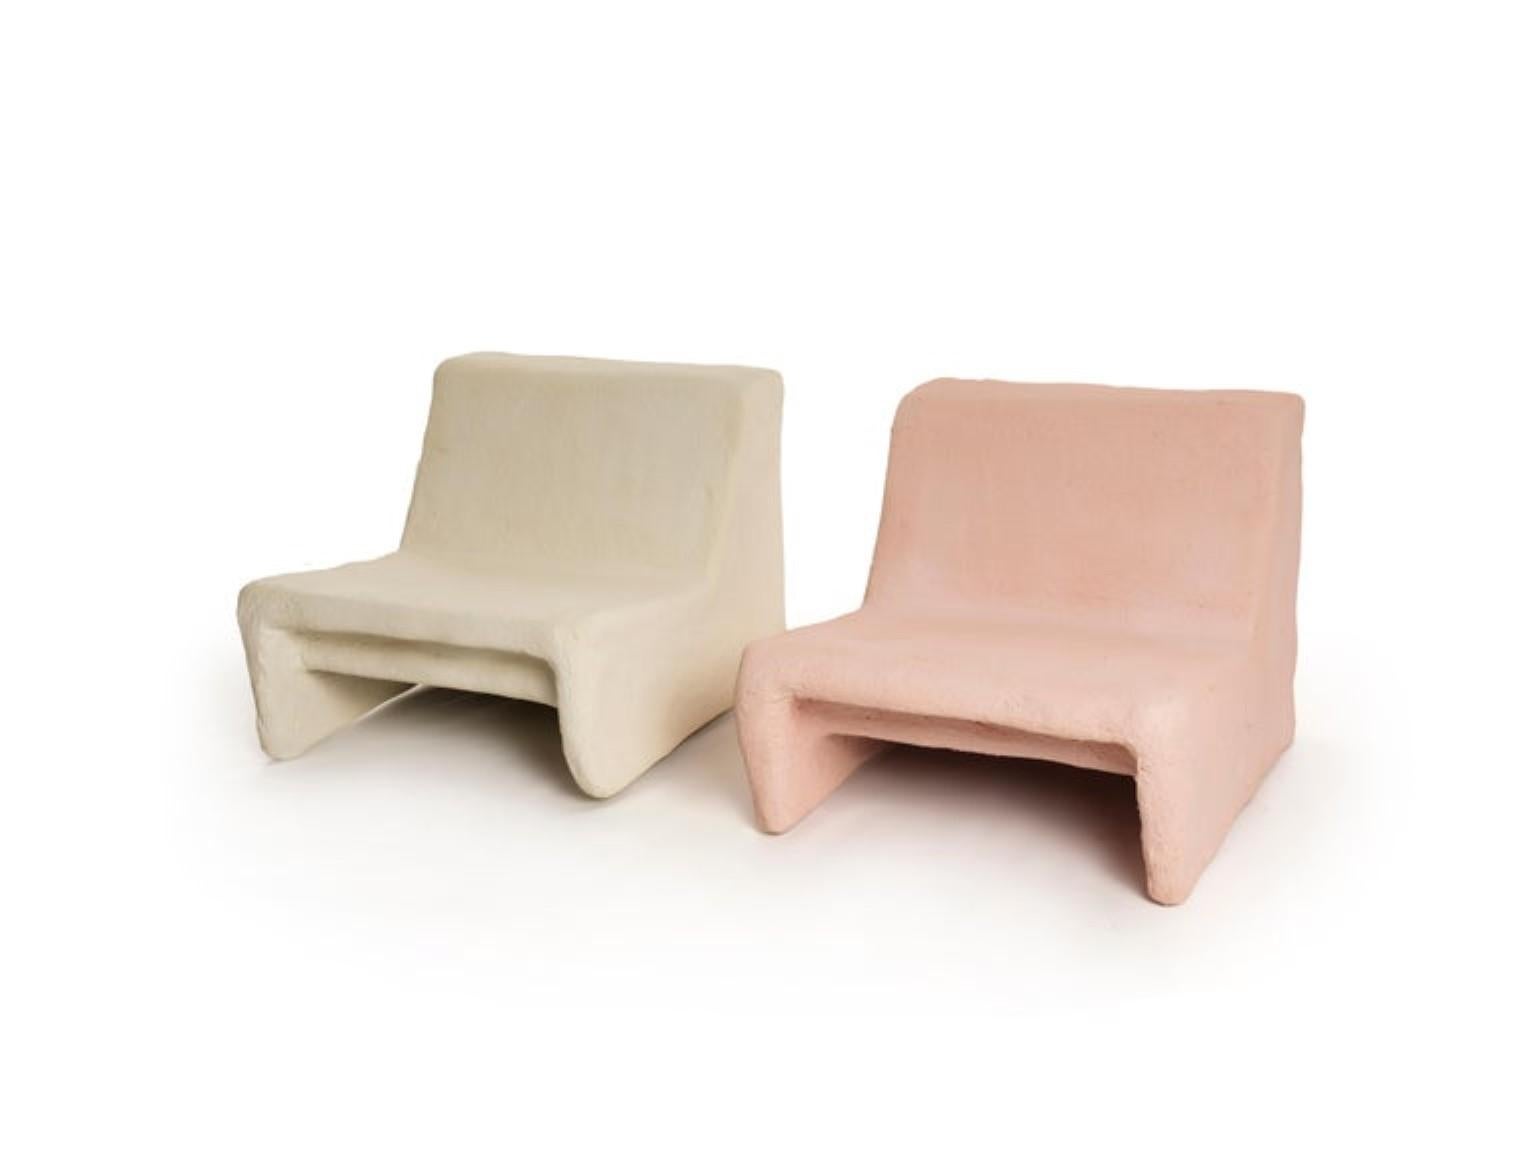 Pair of daisy chair by Mary-Lynn & Carlo
The elephant project
Dimensions: H 60 x W 69 x D 81 cm
Materials: Concrete colored, foam polystyrene
Finish: Water, stains repellent

Marylynn and Carlo:

The Massoud siblings have been experimenting